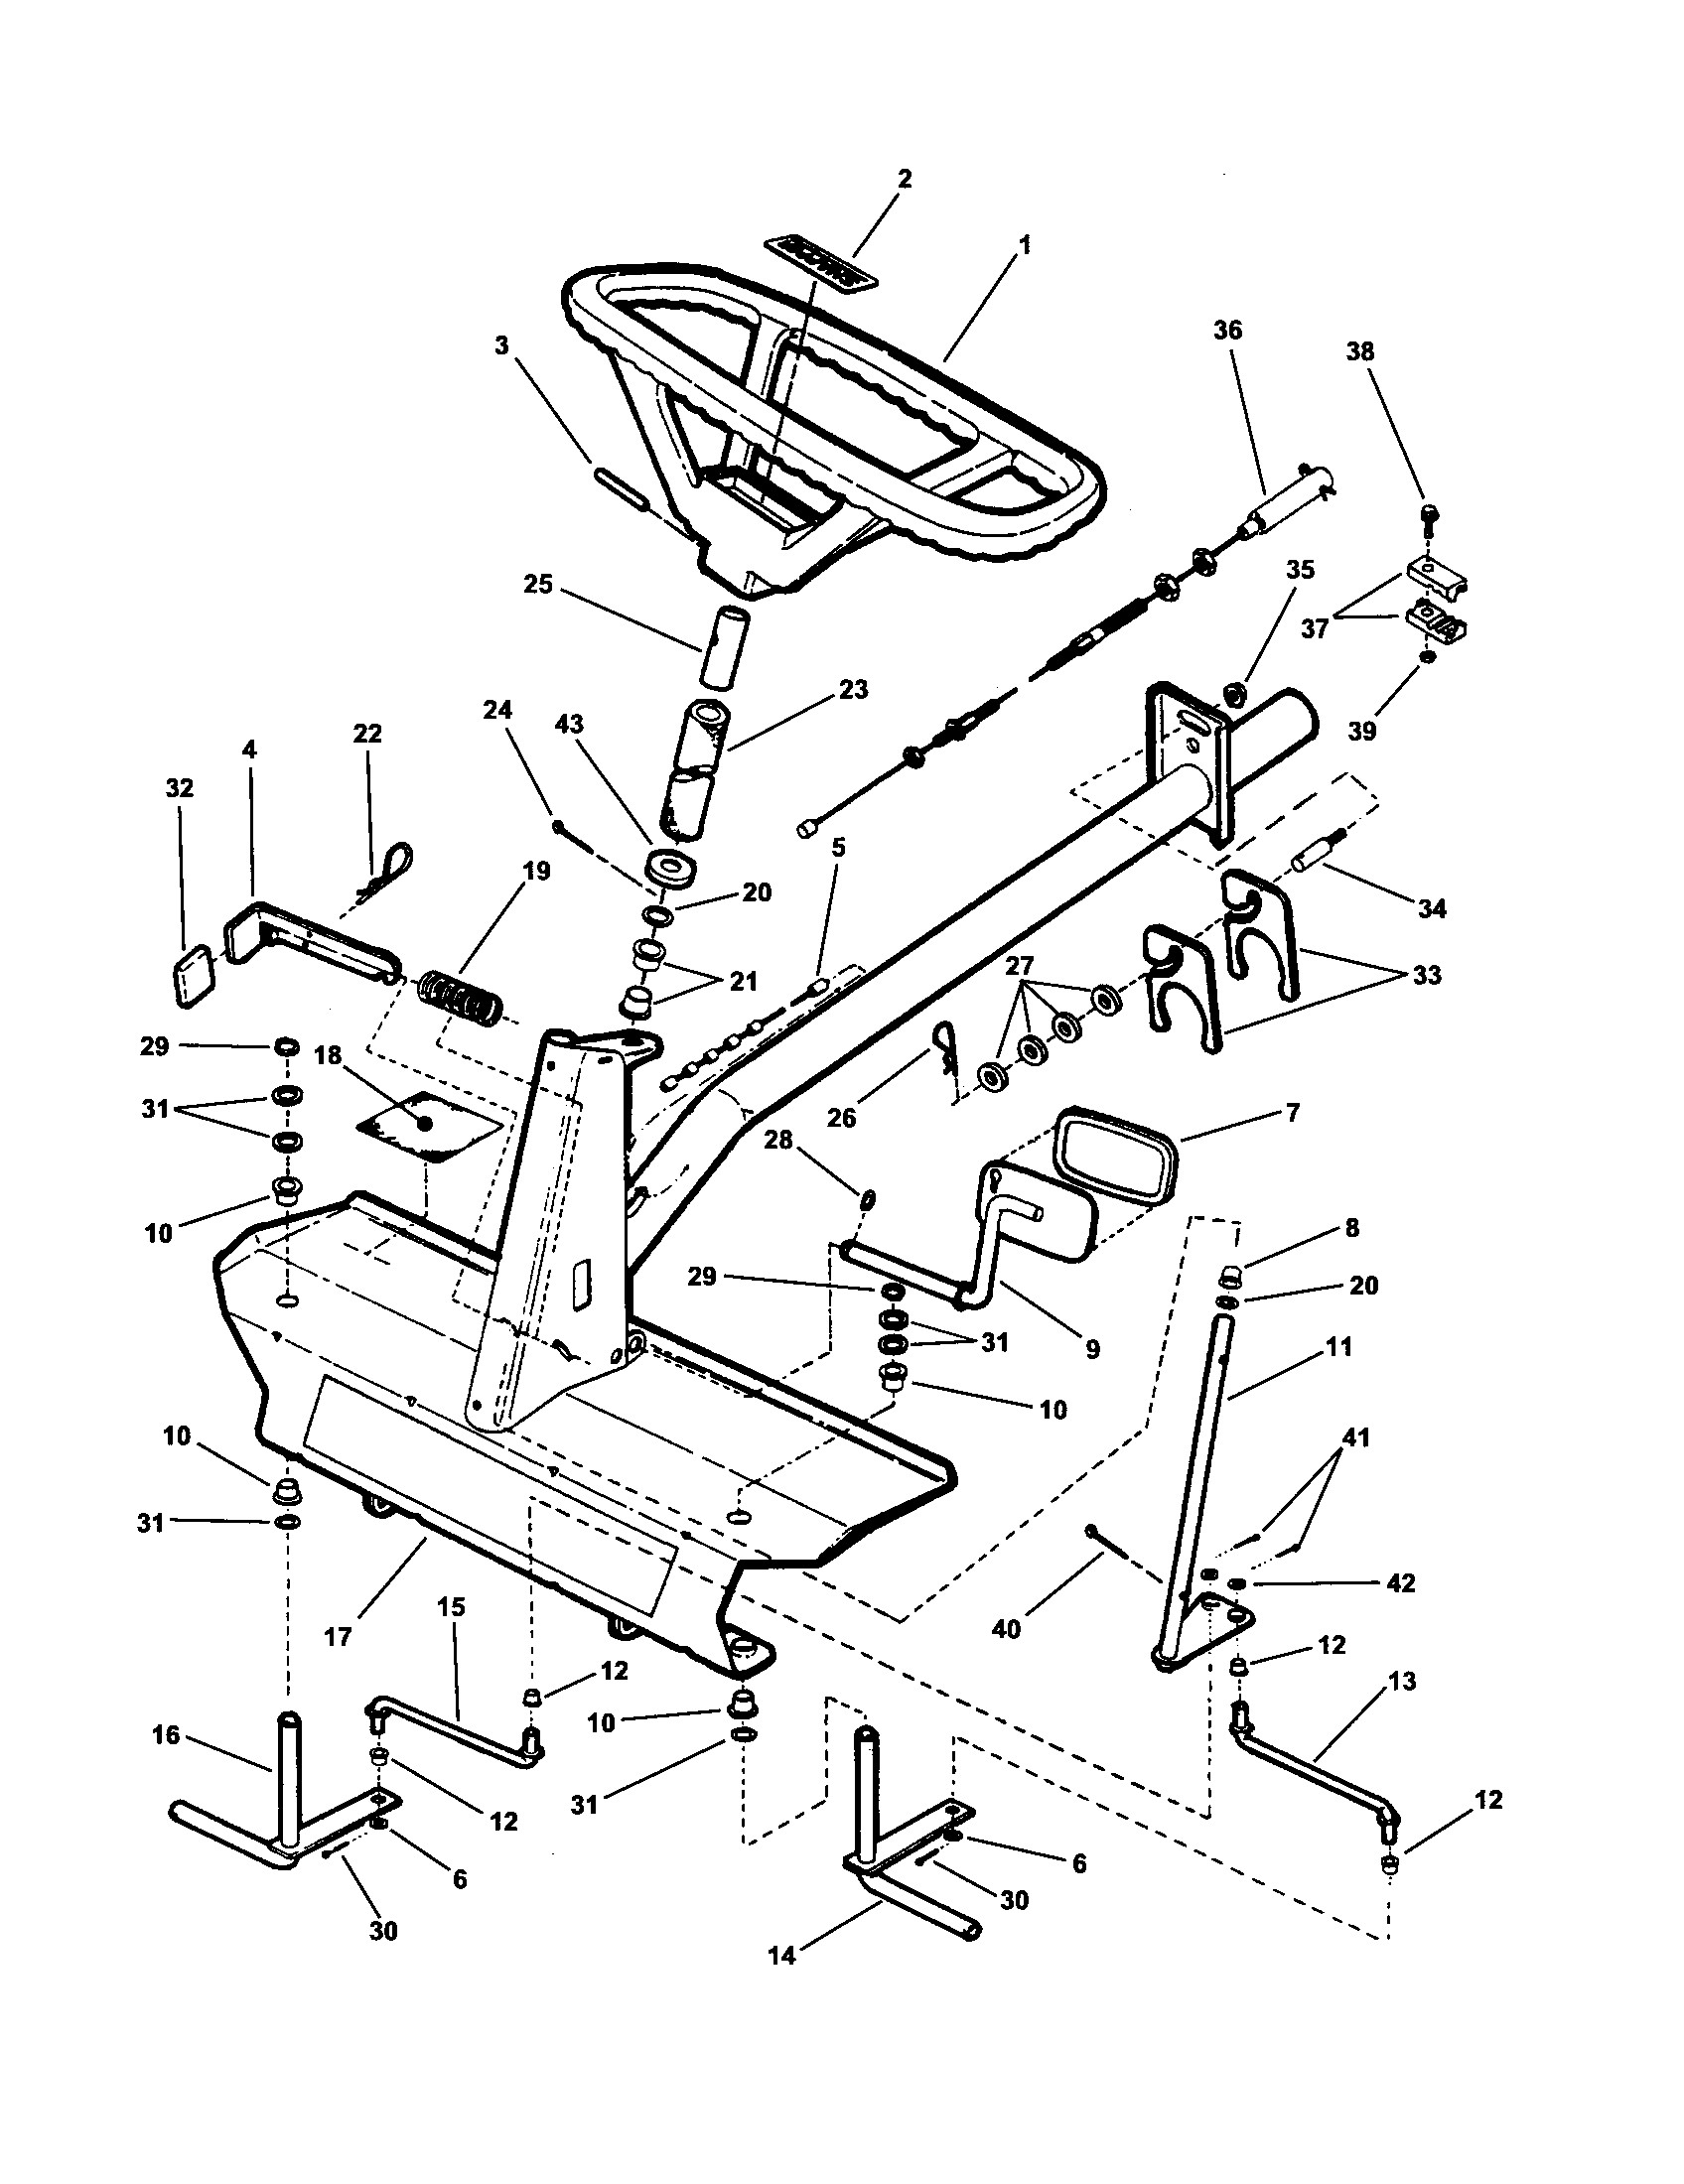 Small Engine Parts Diagram Looking for Snapper Model Wm B Rear Engine Riding Mower Repair Of Small Engine Parts Diagram